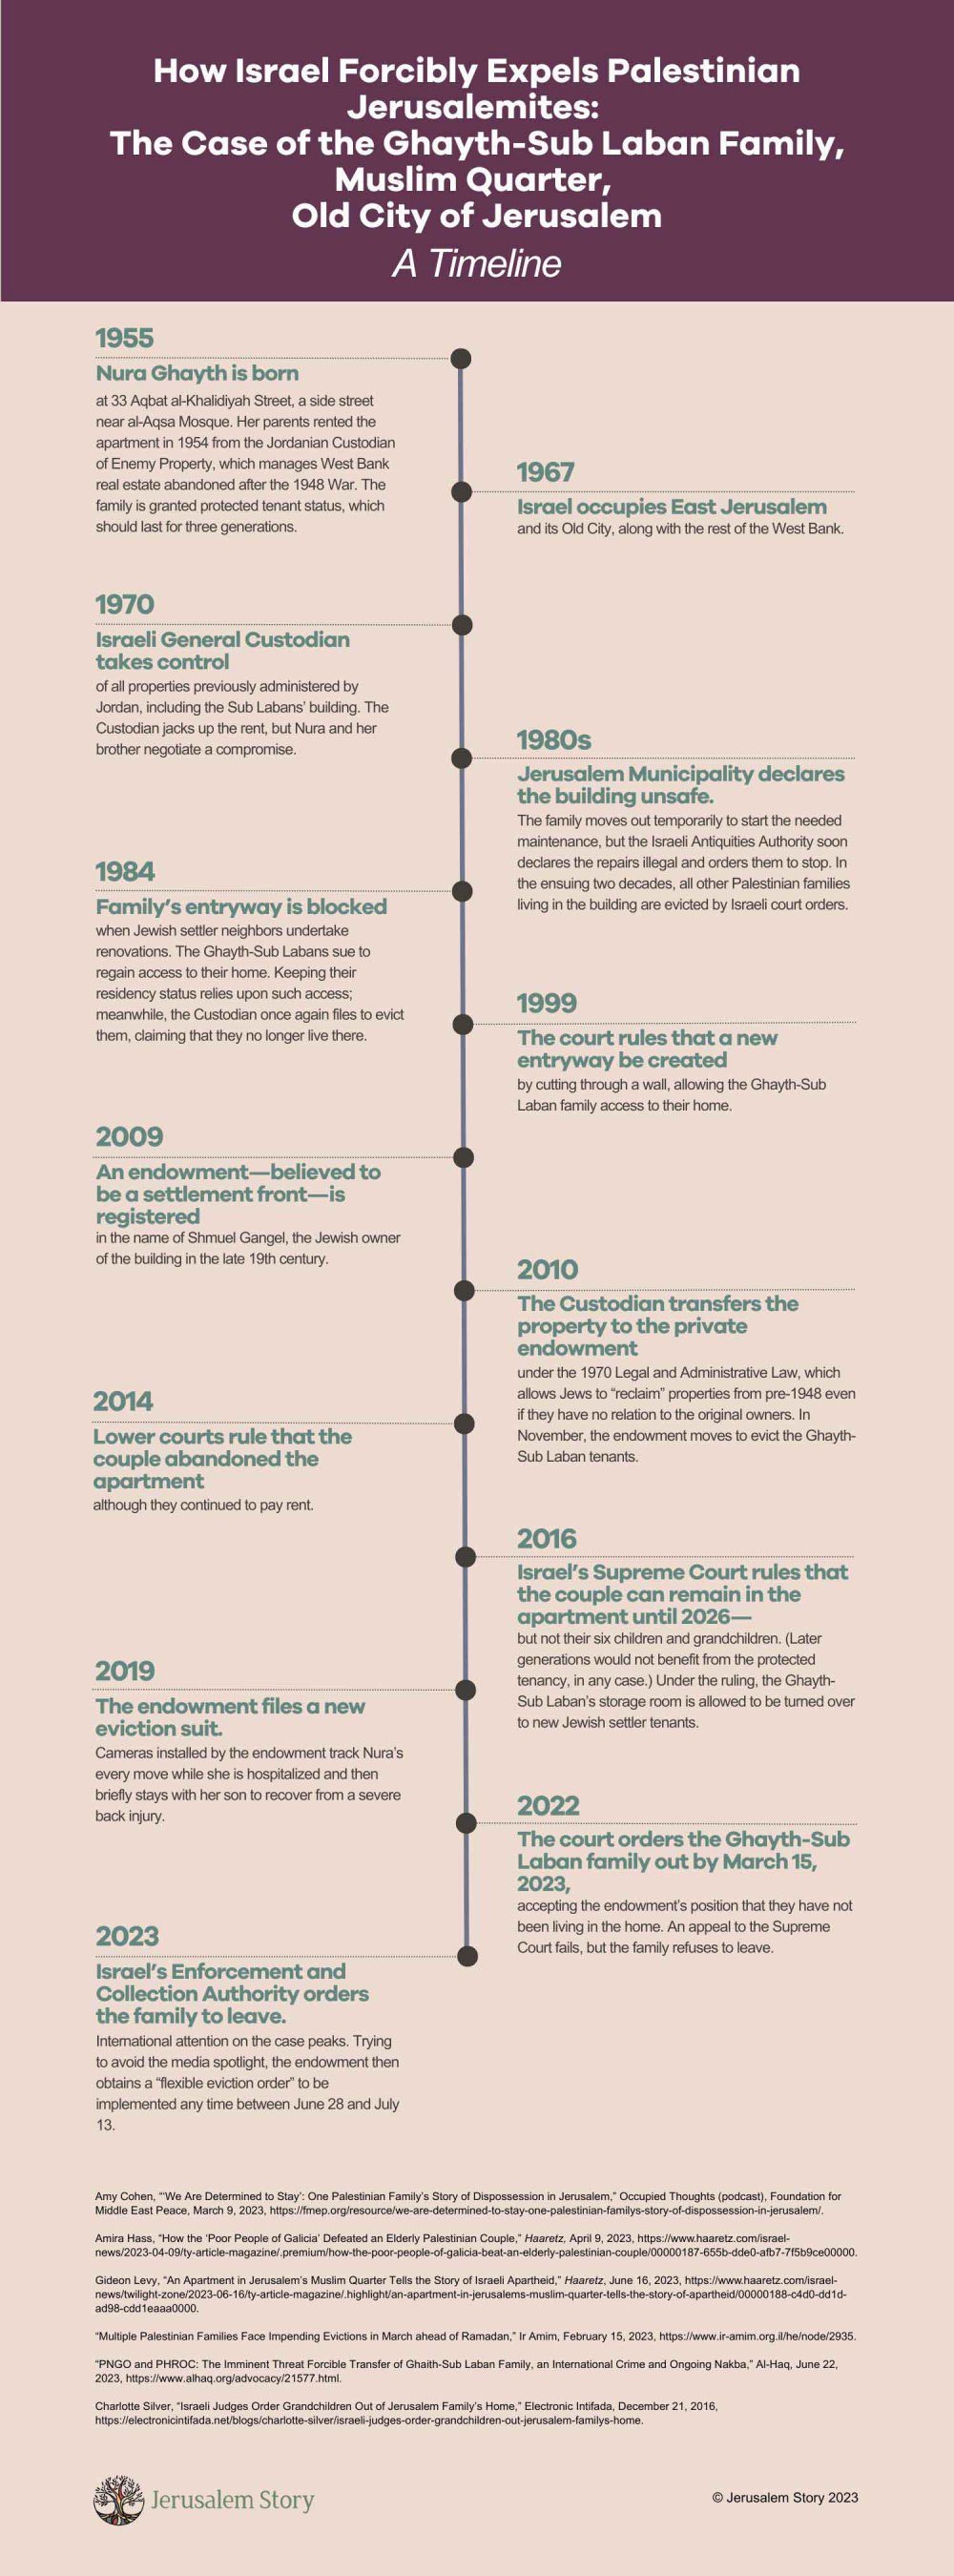 Timeline of the measures Israel has taken to force the Ghayth-Sub Labans from their family home in Jerusalem's Old City